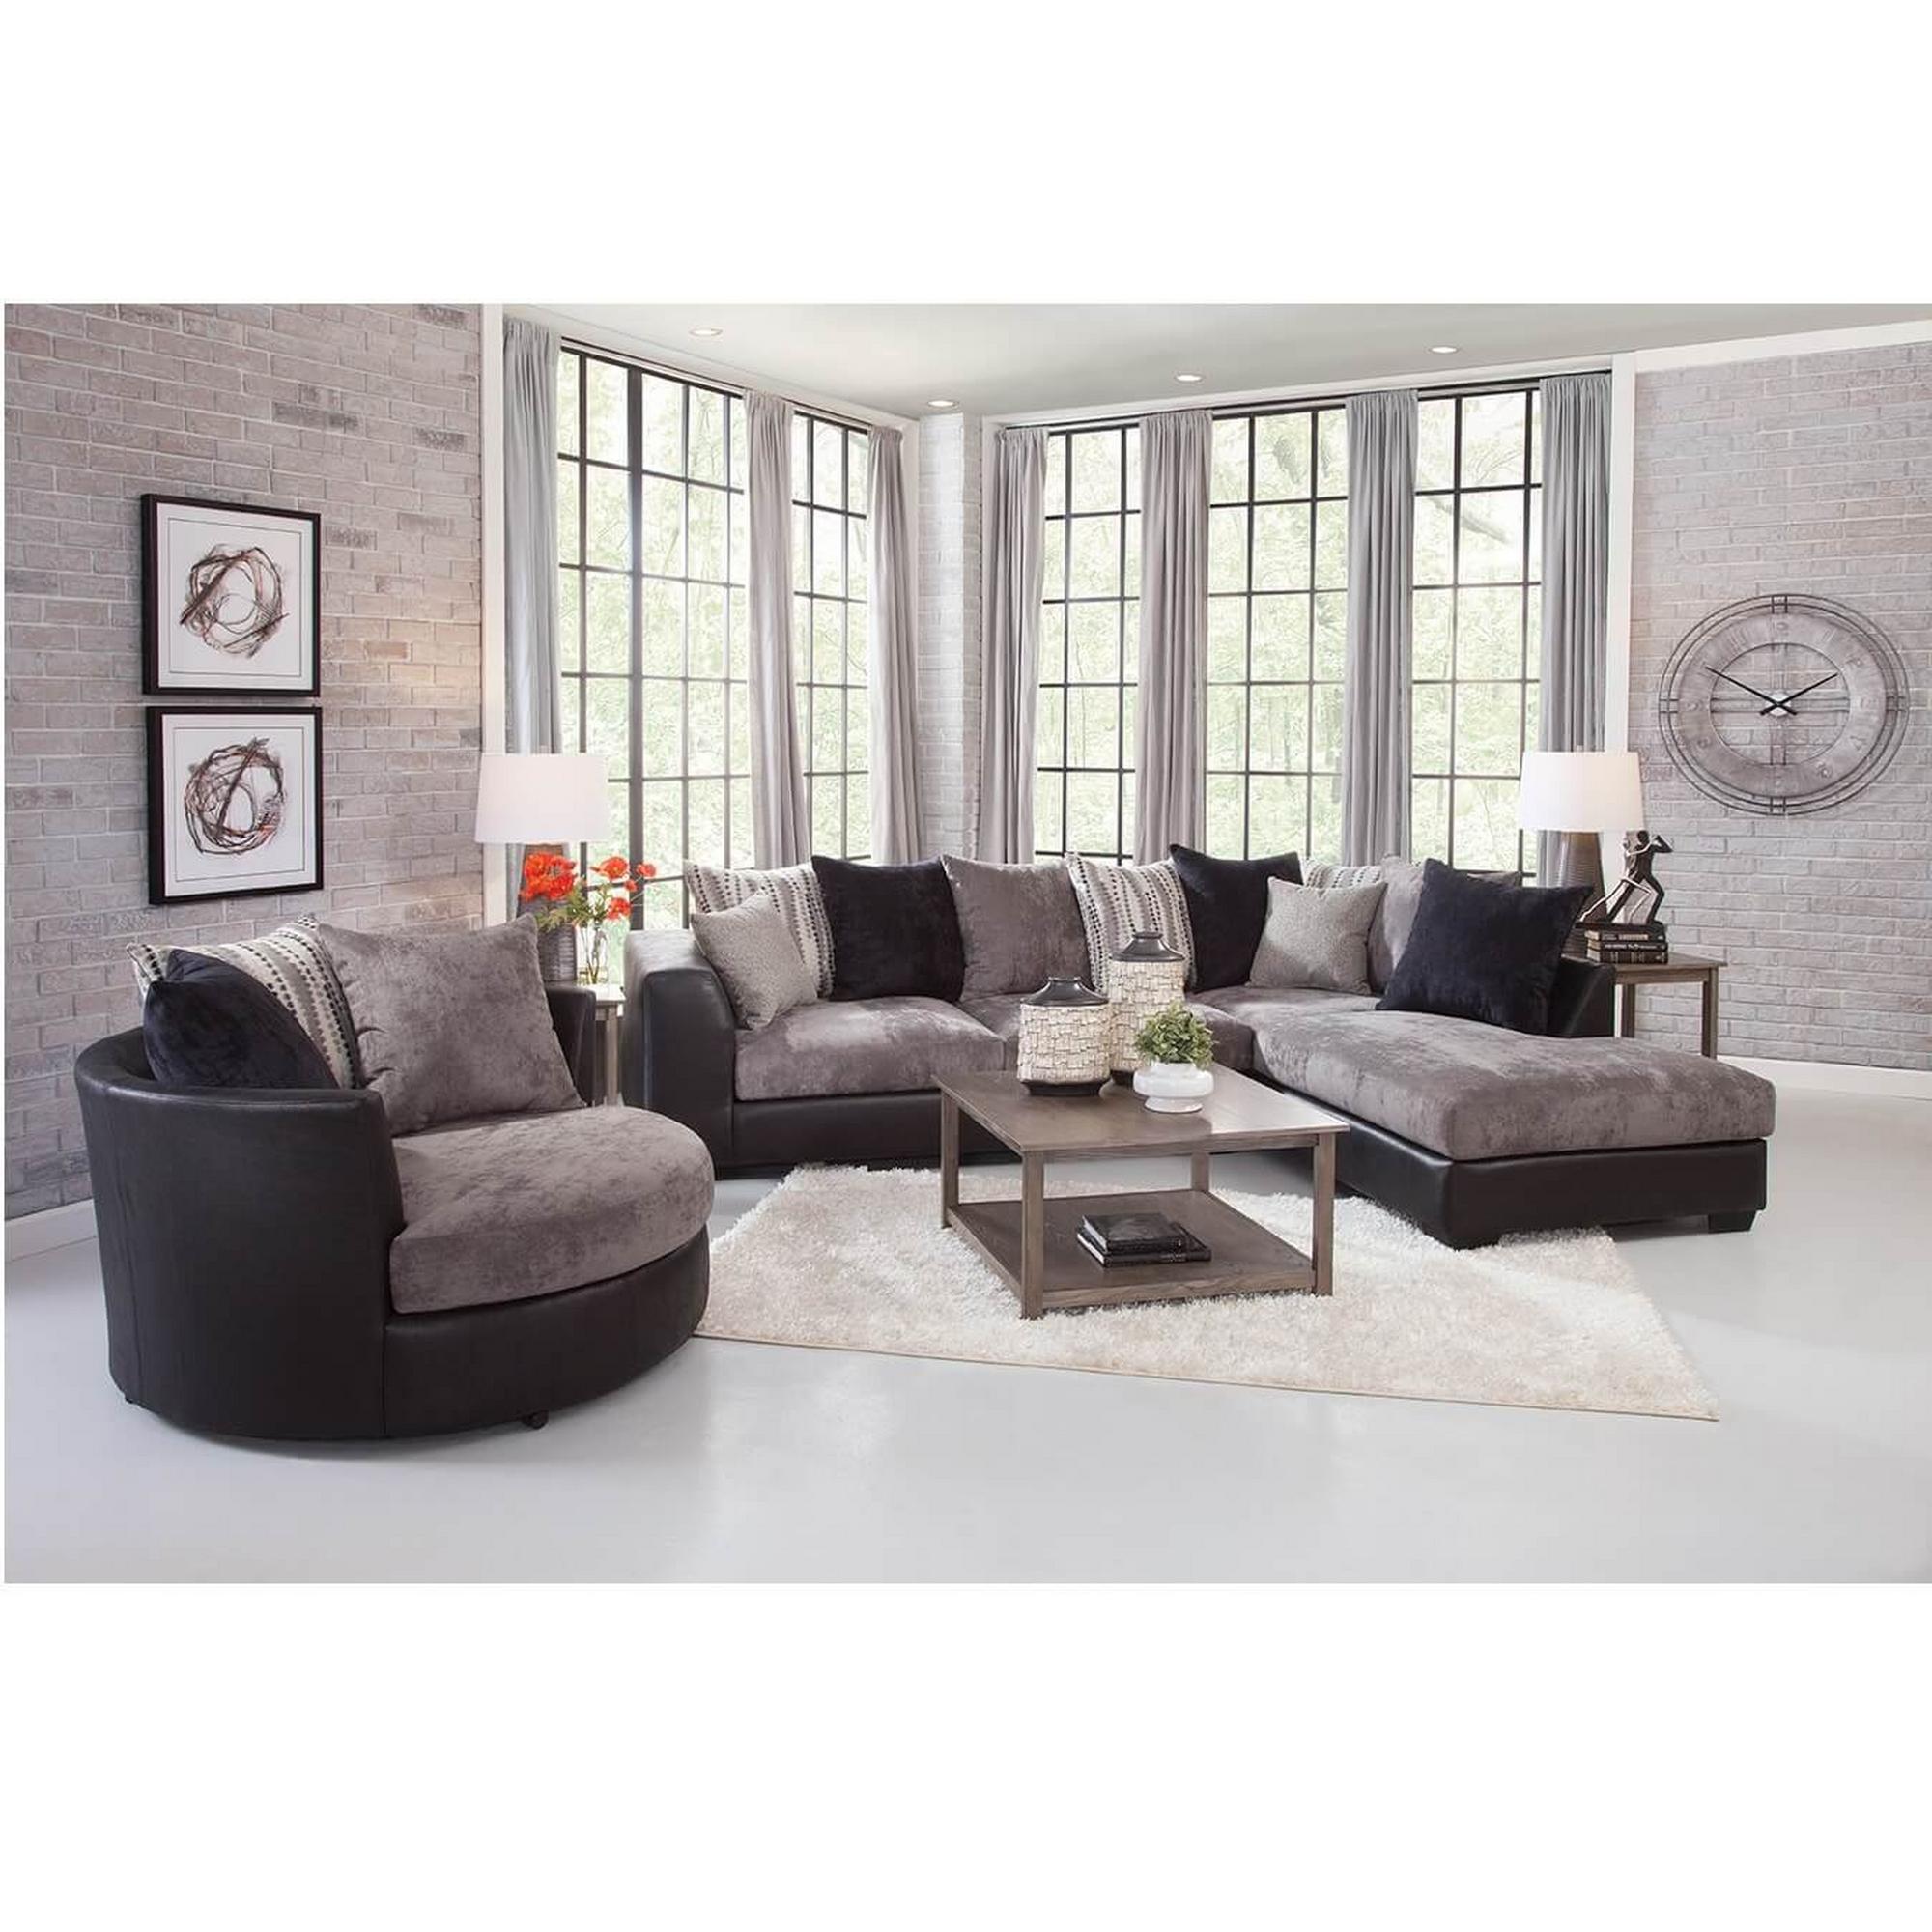 Rent To Own Woodhaven 3 Piece Jamal Chaise Sofa Sectional With Barrel Chair At Aarons Today